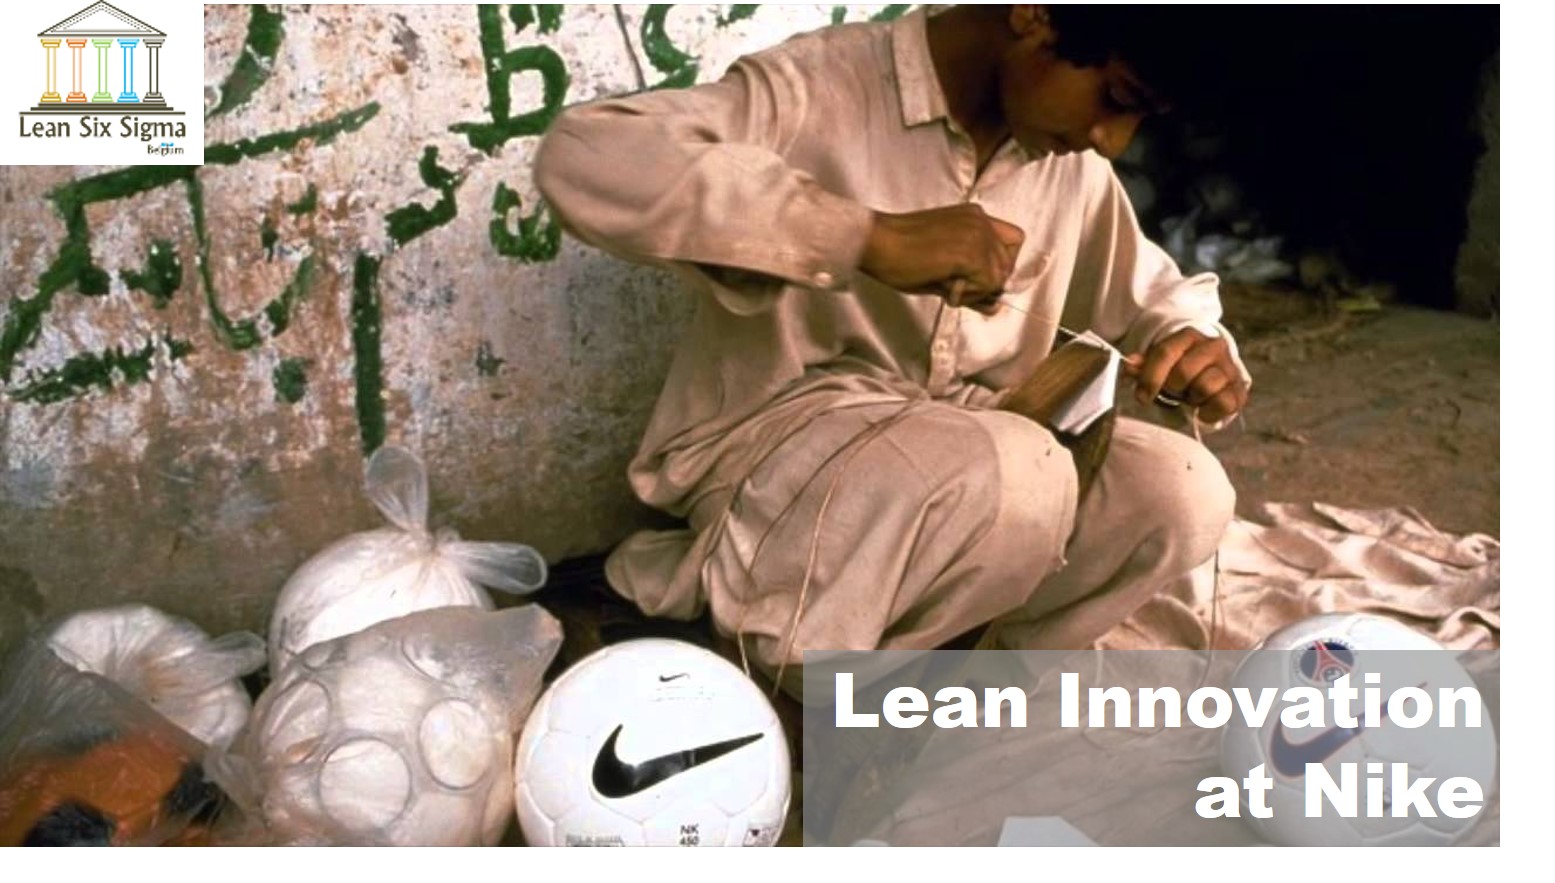 Lean Innovation at Nike